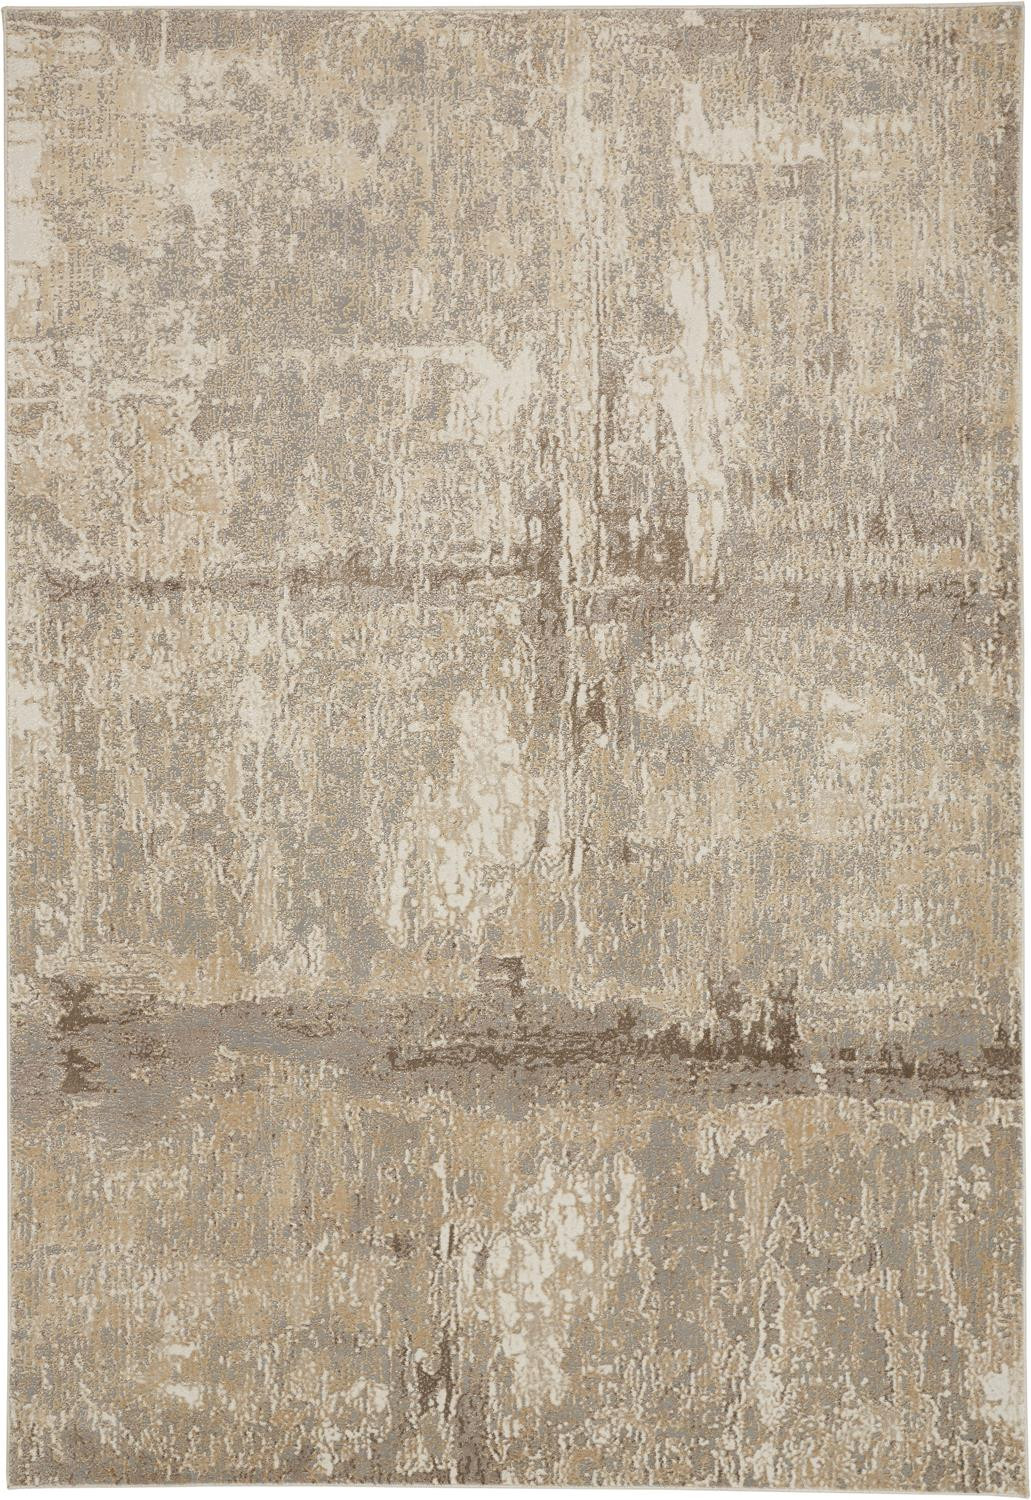 8' X 10' Tan Ivory And Brown Abstract Area Rug-514689-1